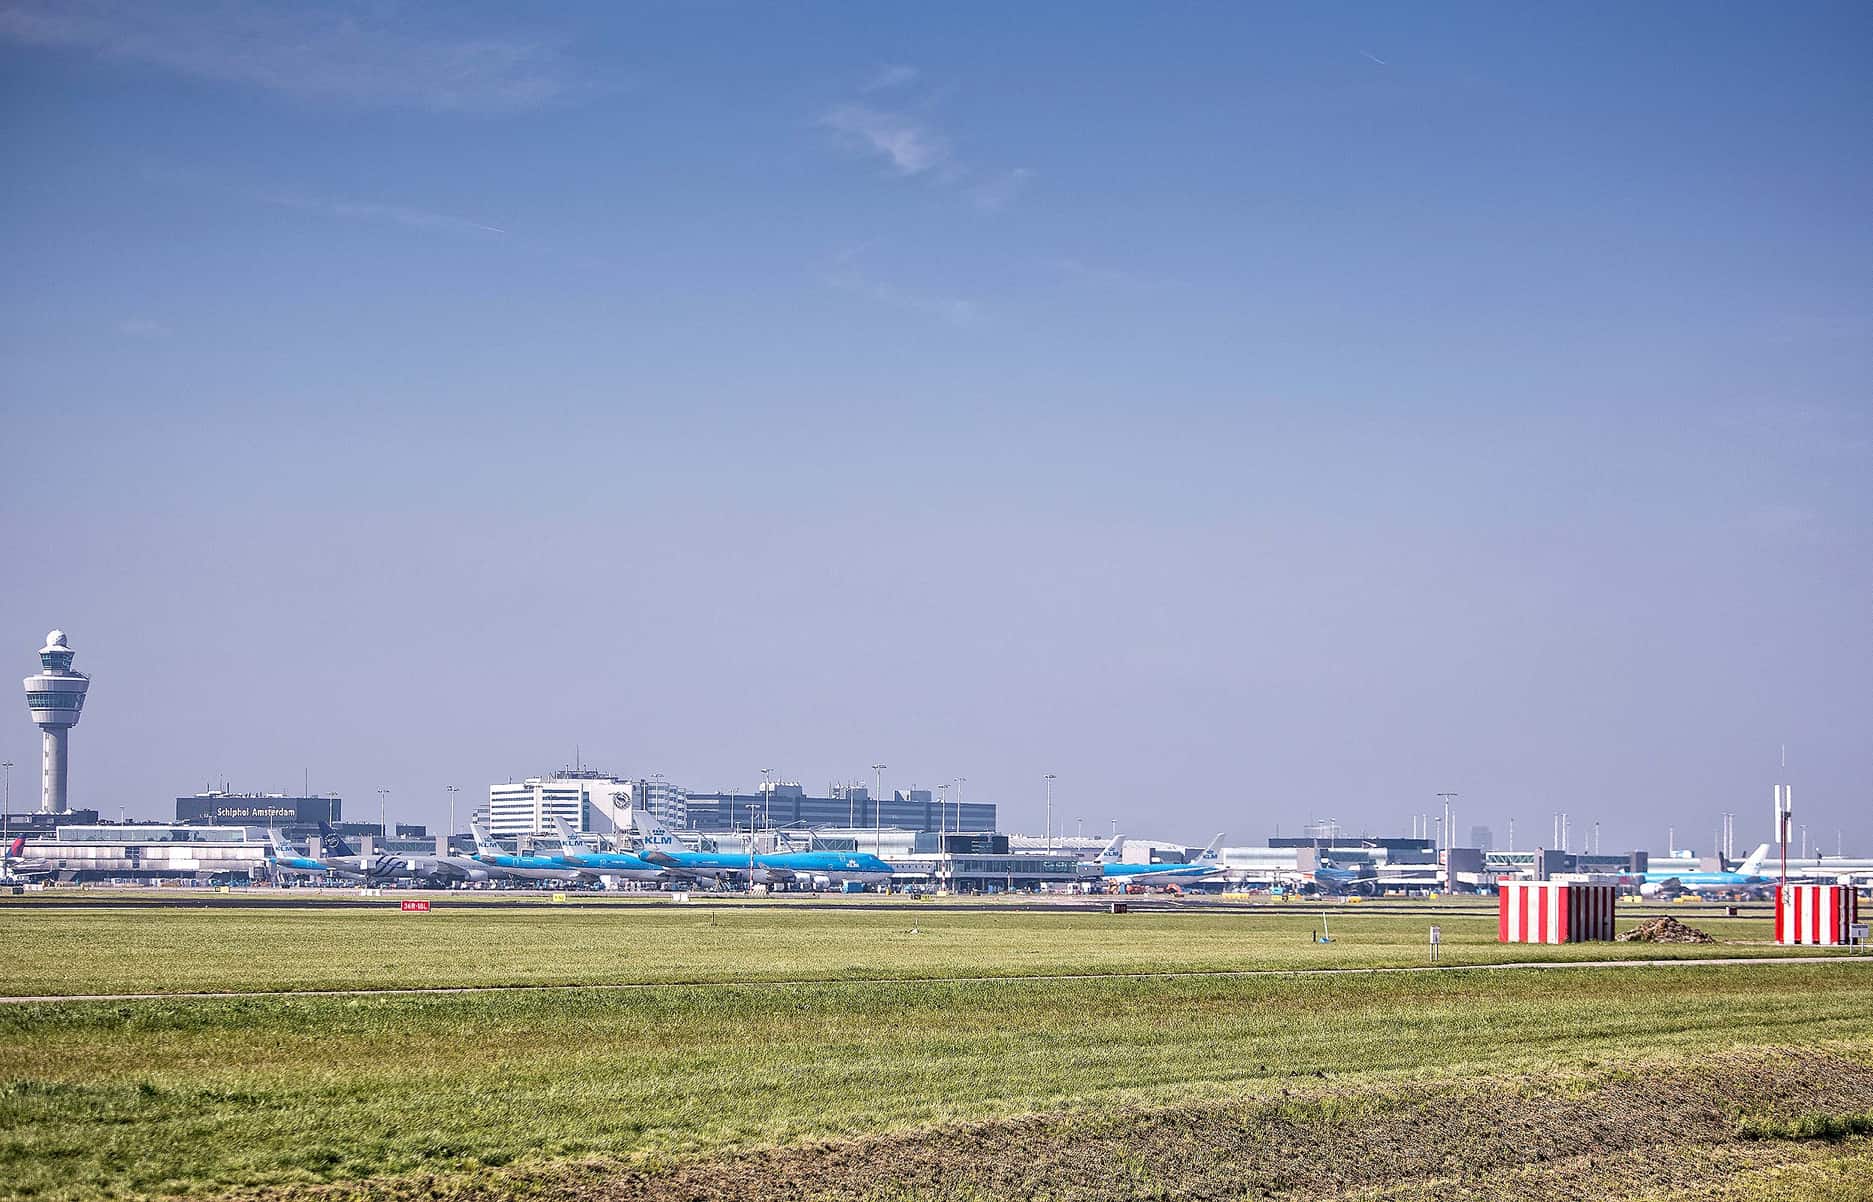 Wide-angle shot of Schiphol airport, showing multiple stationary planes